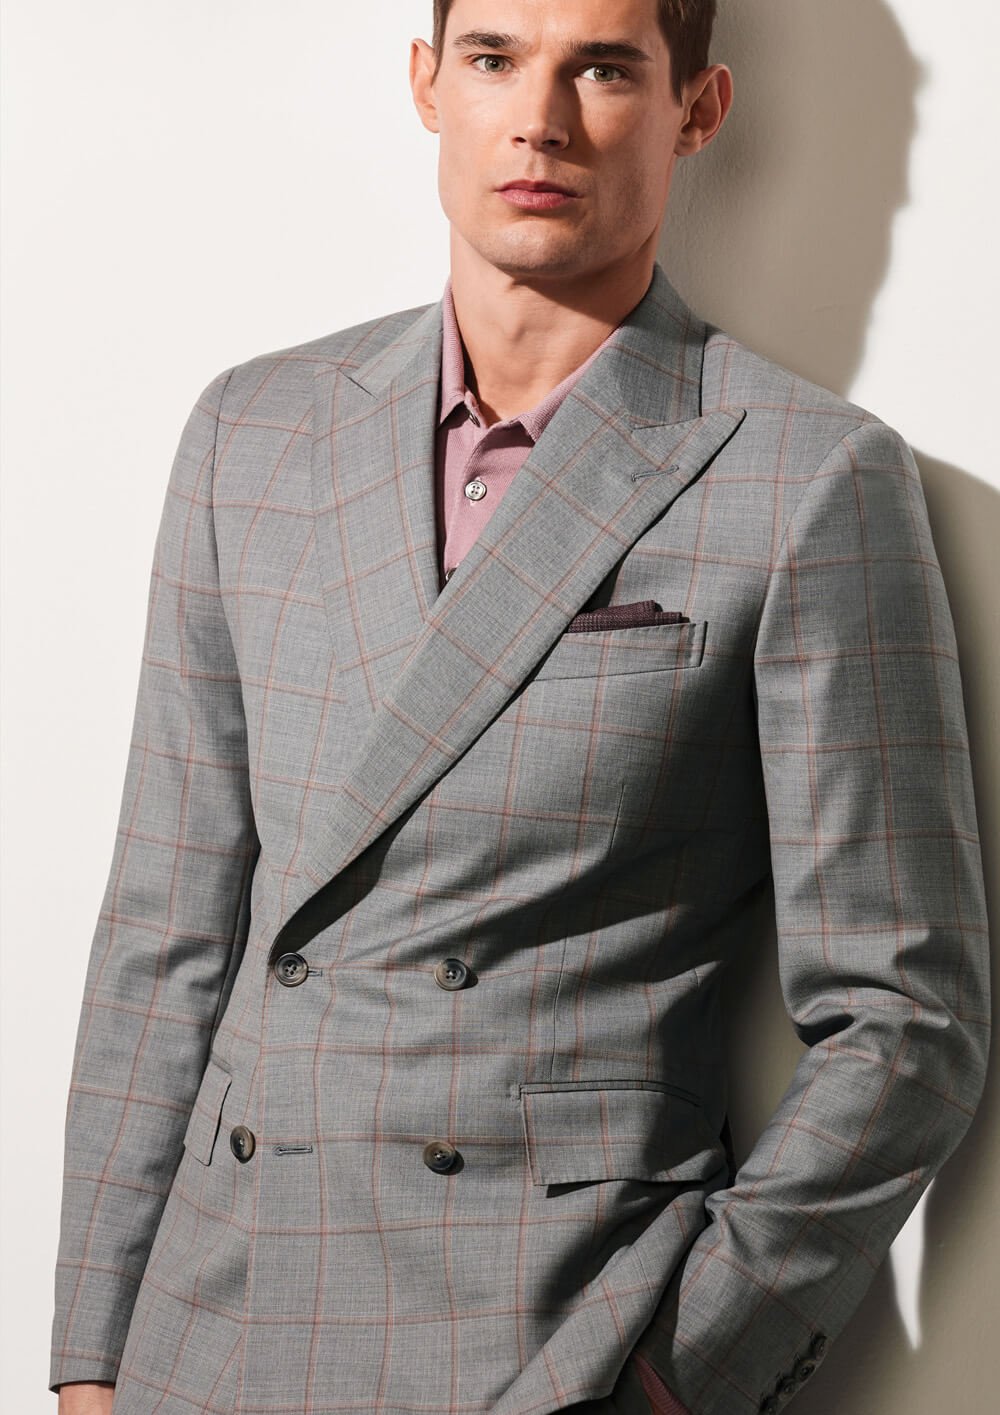 Bespoke Suits: Classic - Formal — Bespoke Tailor for Custom Suits & Shirts.